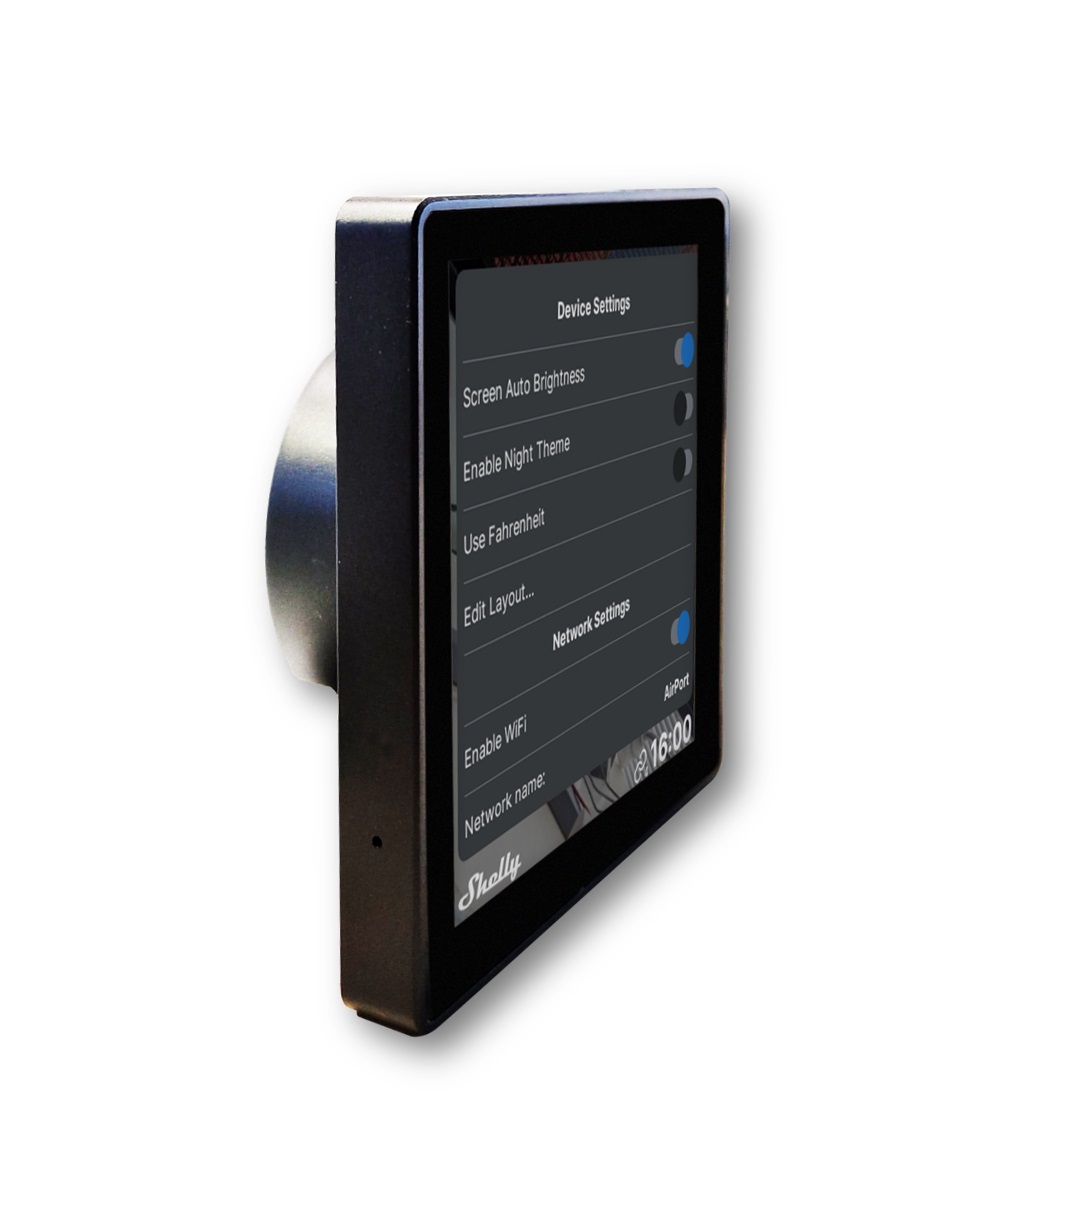 Shelly Wall Display WLAN Wand - Touchdisplay mit Android, Farbe: schwarz